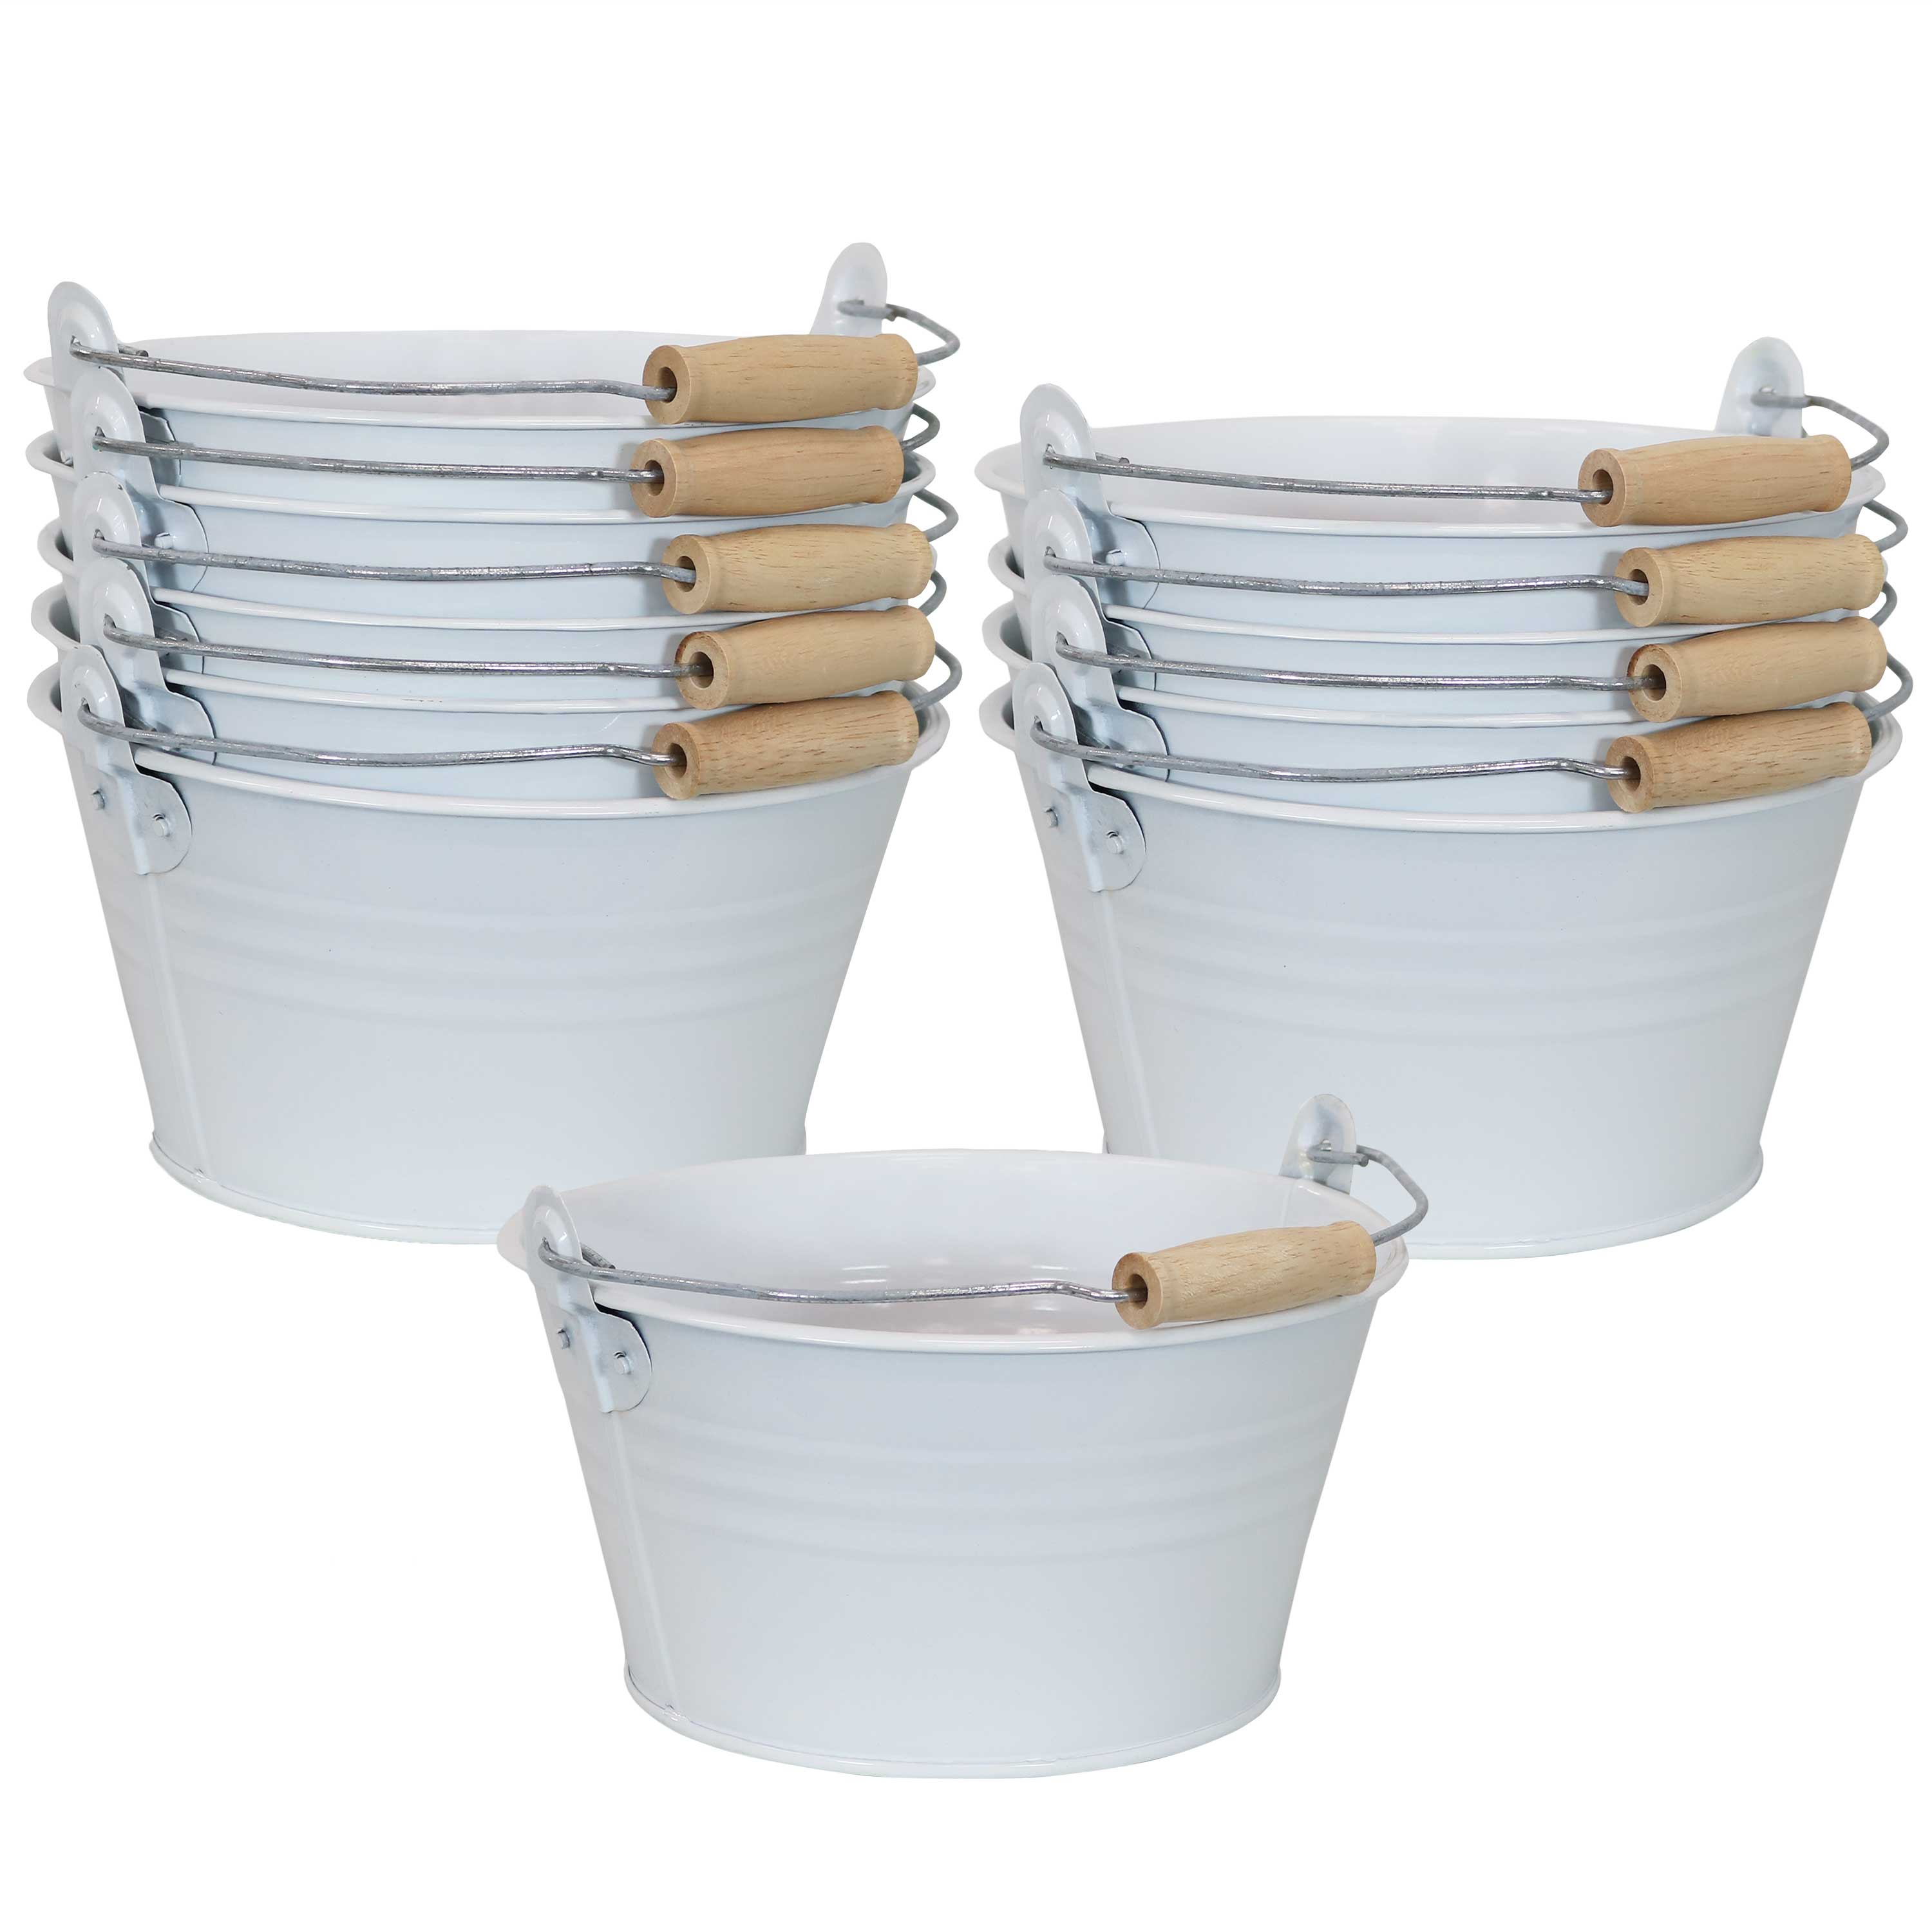 square buckets - 4 gallon size - 10 pcs ($8.25 each includes shipping)